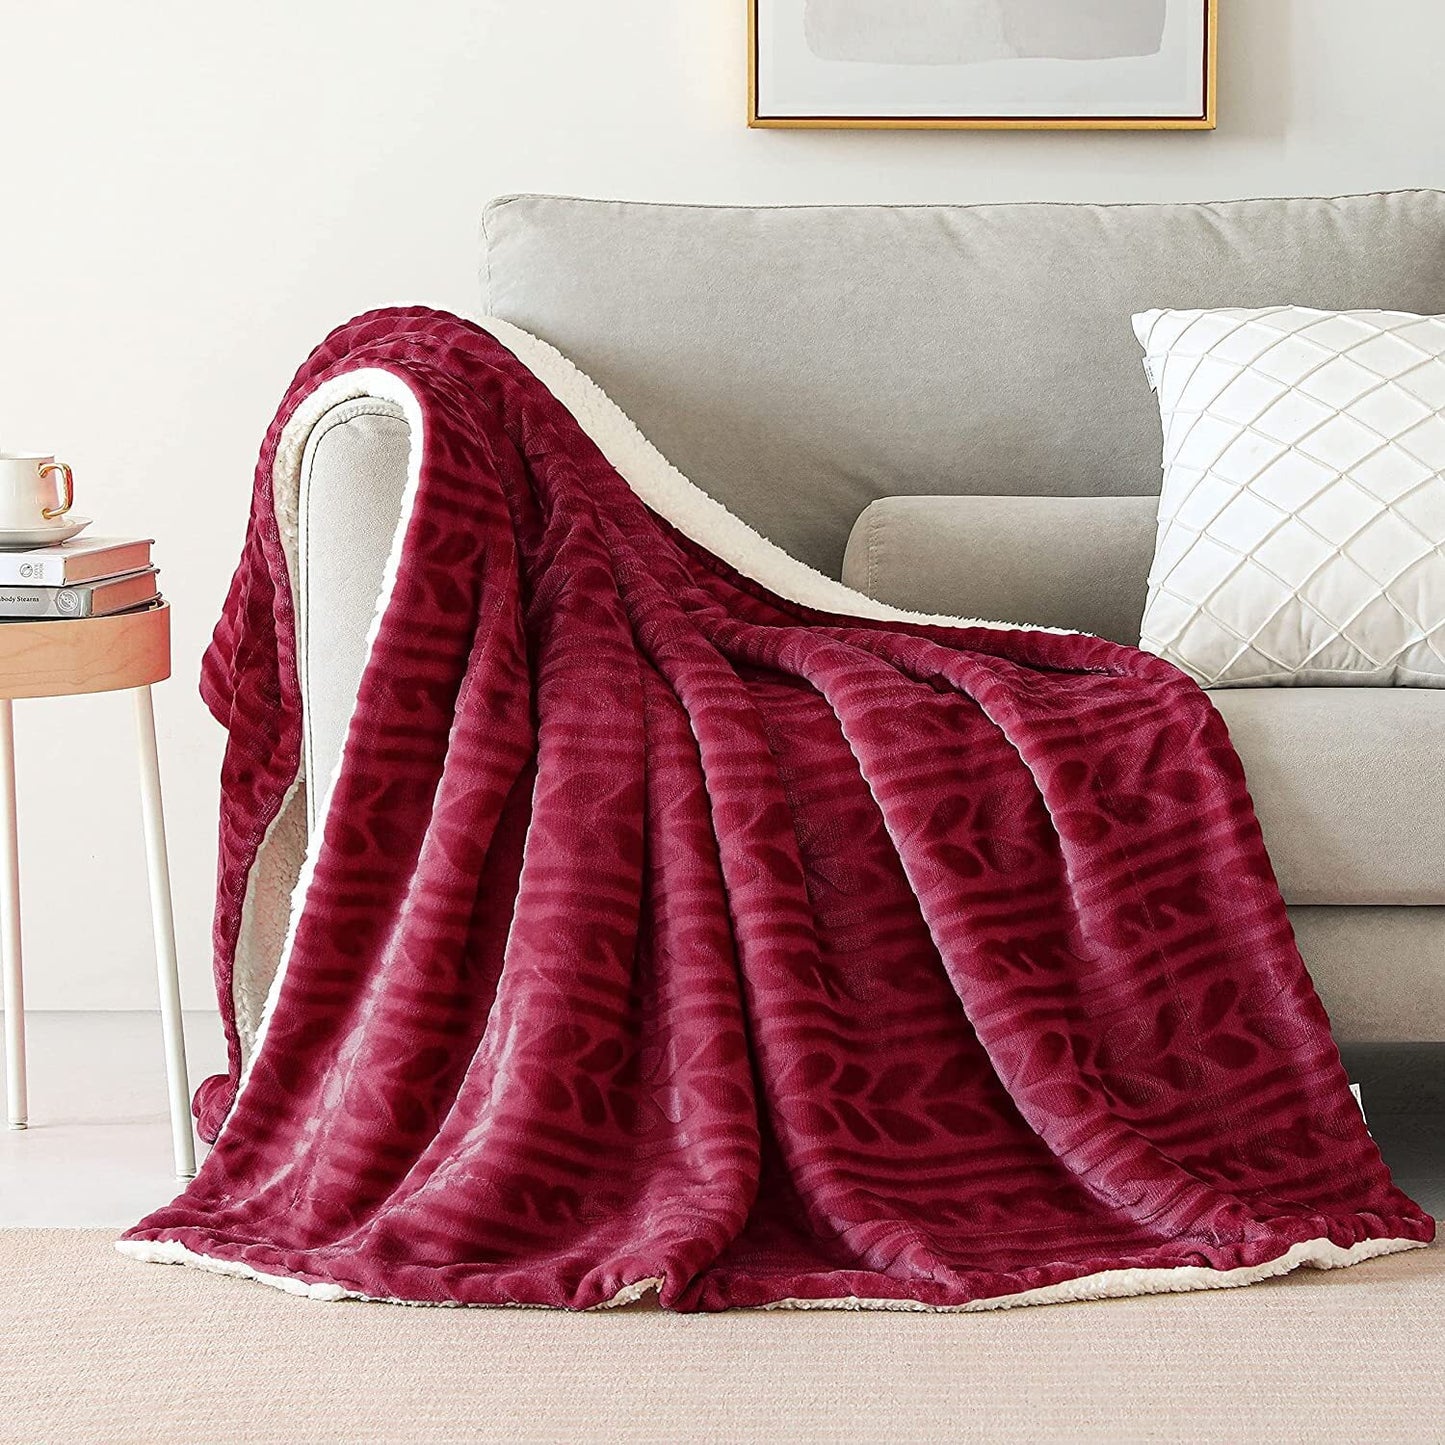 Exclusivo Mezcla 50"x70" Sherpa Fleece Throw Blanket, Reversible Velvet Plush Blankets and Soft Throws for Couch, Sofa, Bed, Super Cozy Thick and Warm, Deep Red